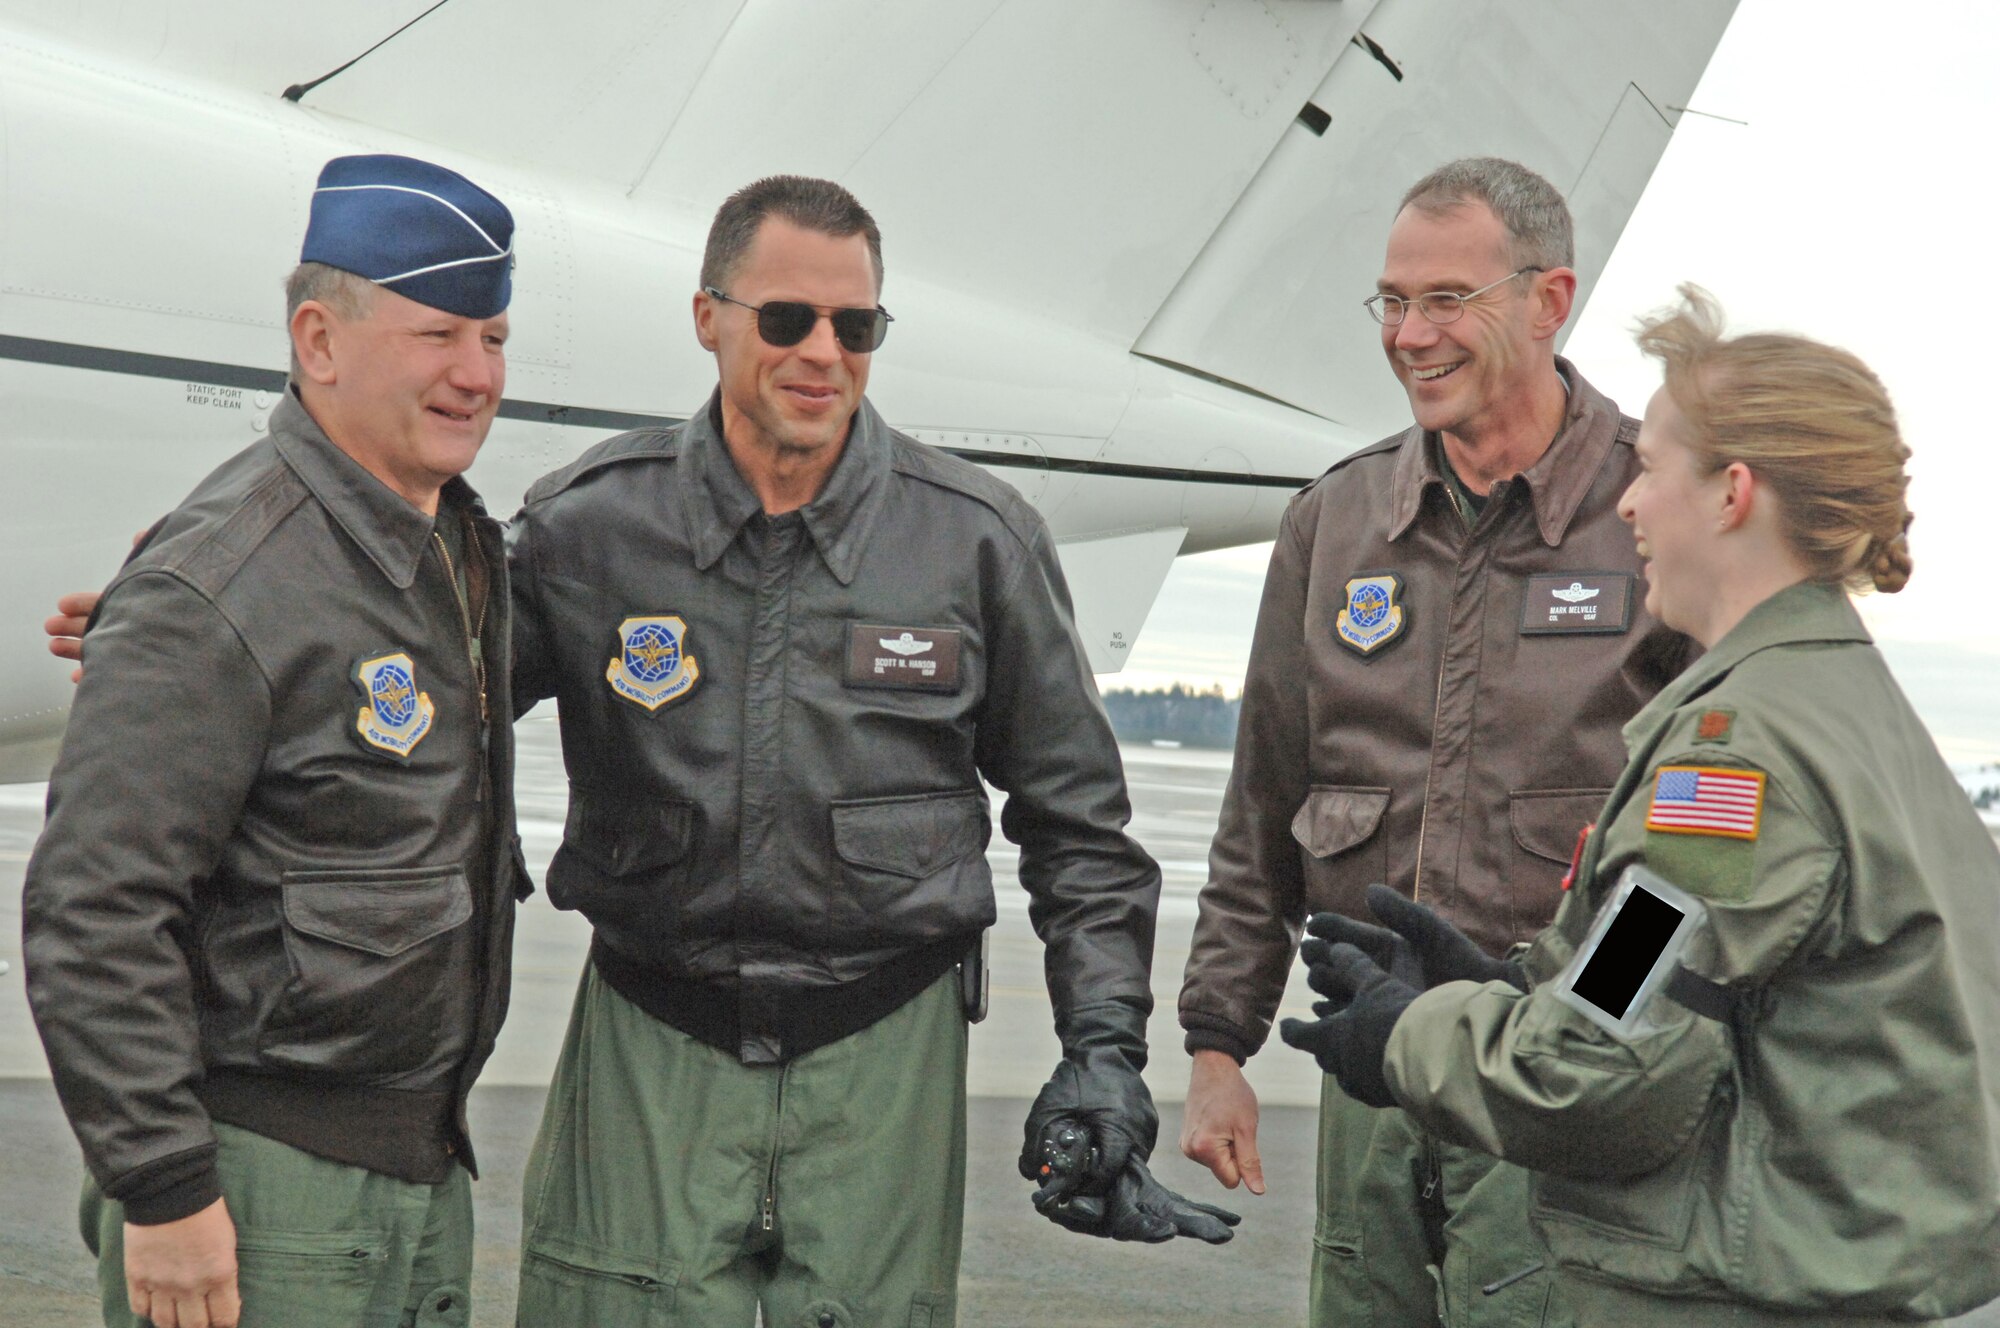 Brig. Gen. Frederick Roggero, Air Mobility Command deputy director of Air, Space and Information operations, is greeted by Col. Scott Hanson, 92nd Air Refueling Wing commander, Col. Mark Melville, 92nd Operations Group commander, and Maj. Leslie Picht, 92nd Wing Safety chief of safety, on the flightline Tuesday. The general is touring AMC bases for a command-wide flight safety briefing. (U.S. Air Force photo by Senior Airman Jessica Fuentez)
